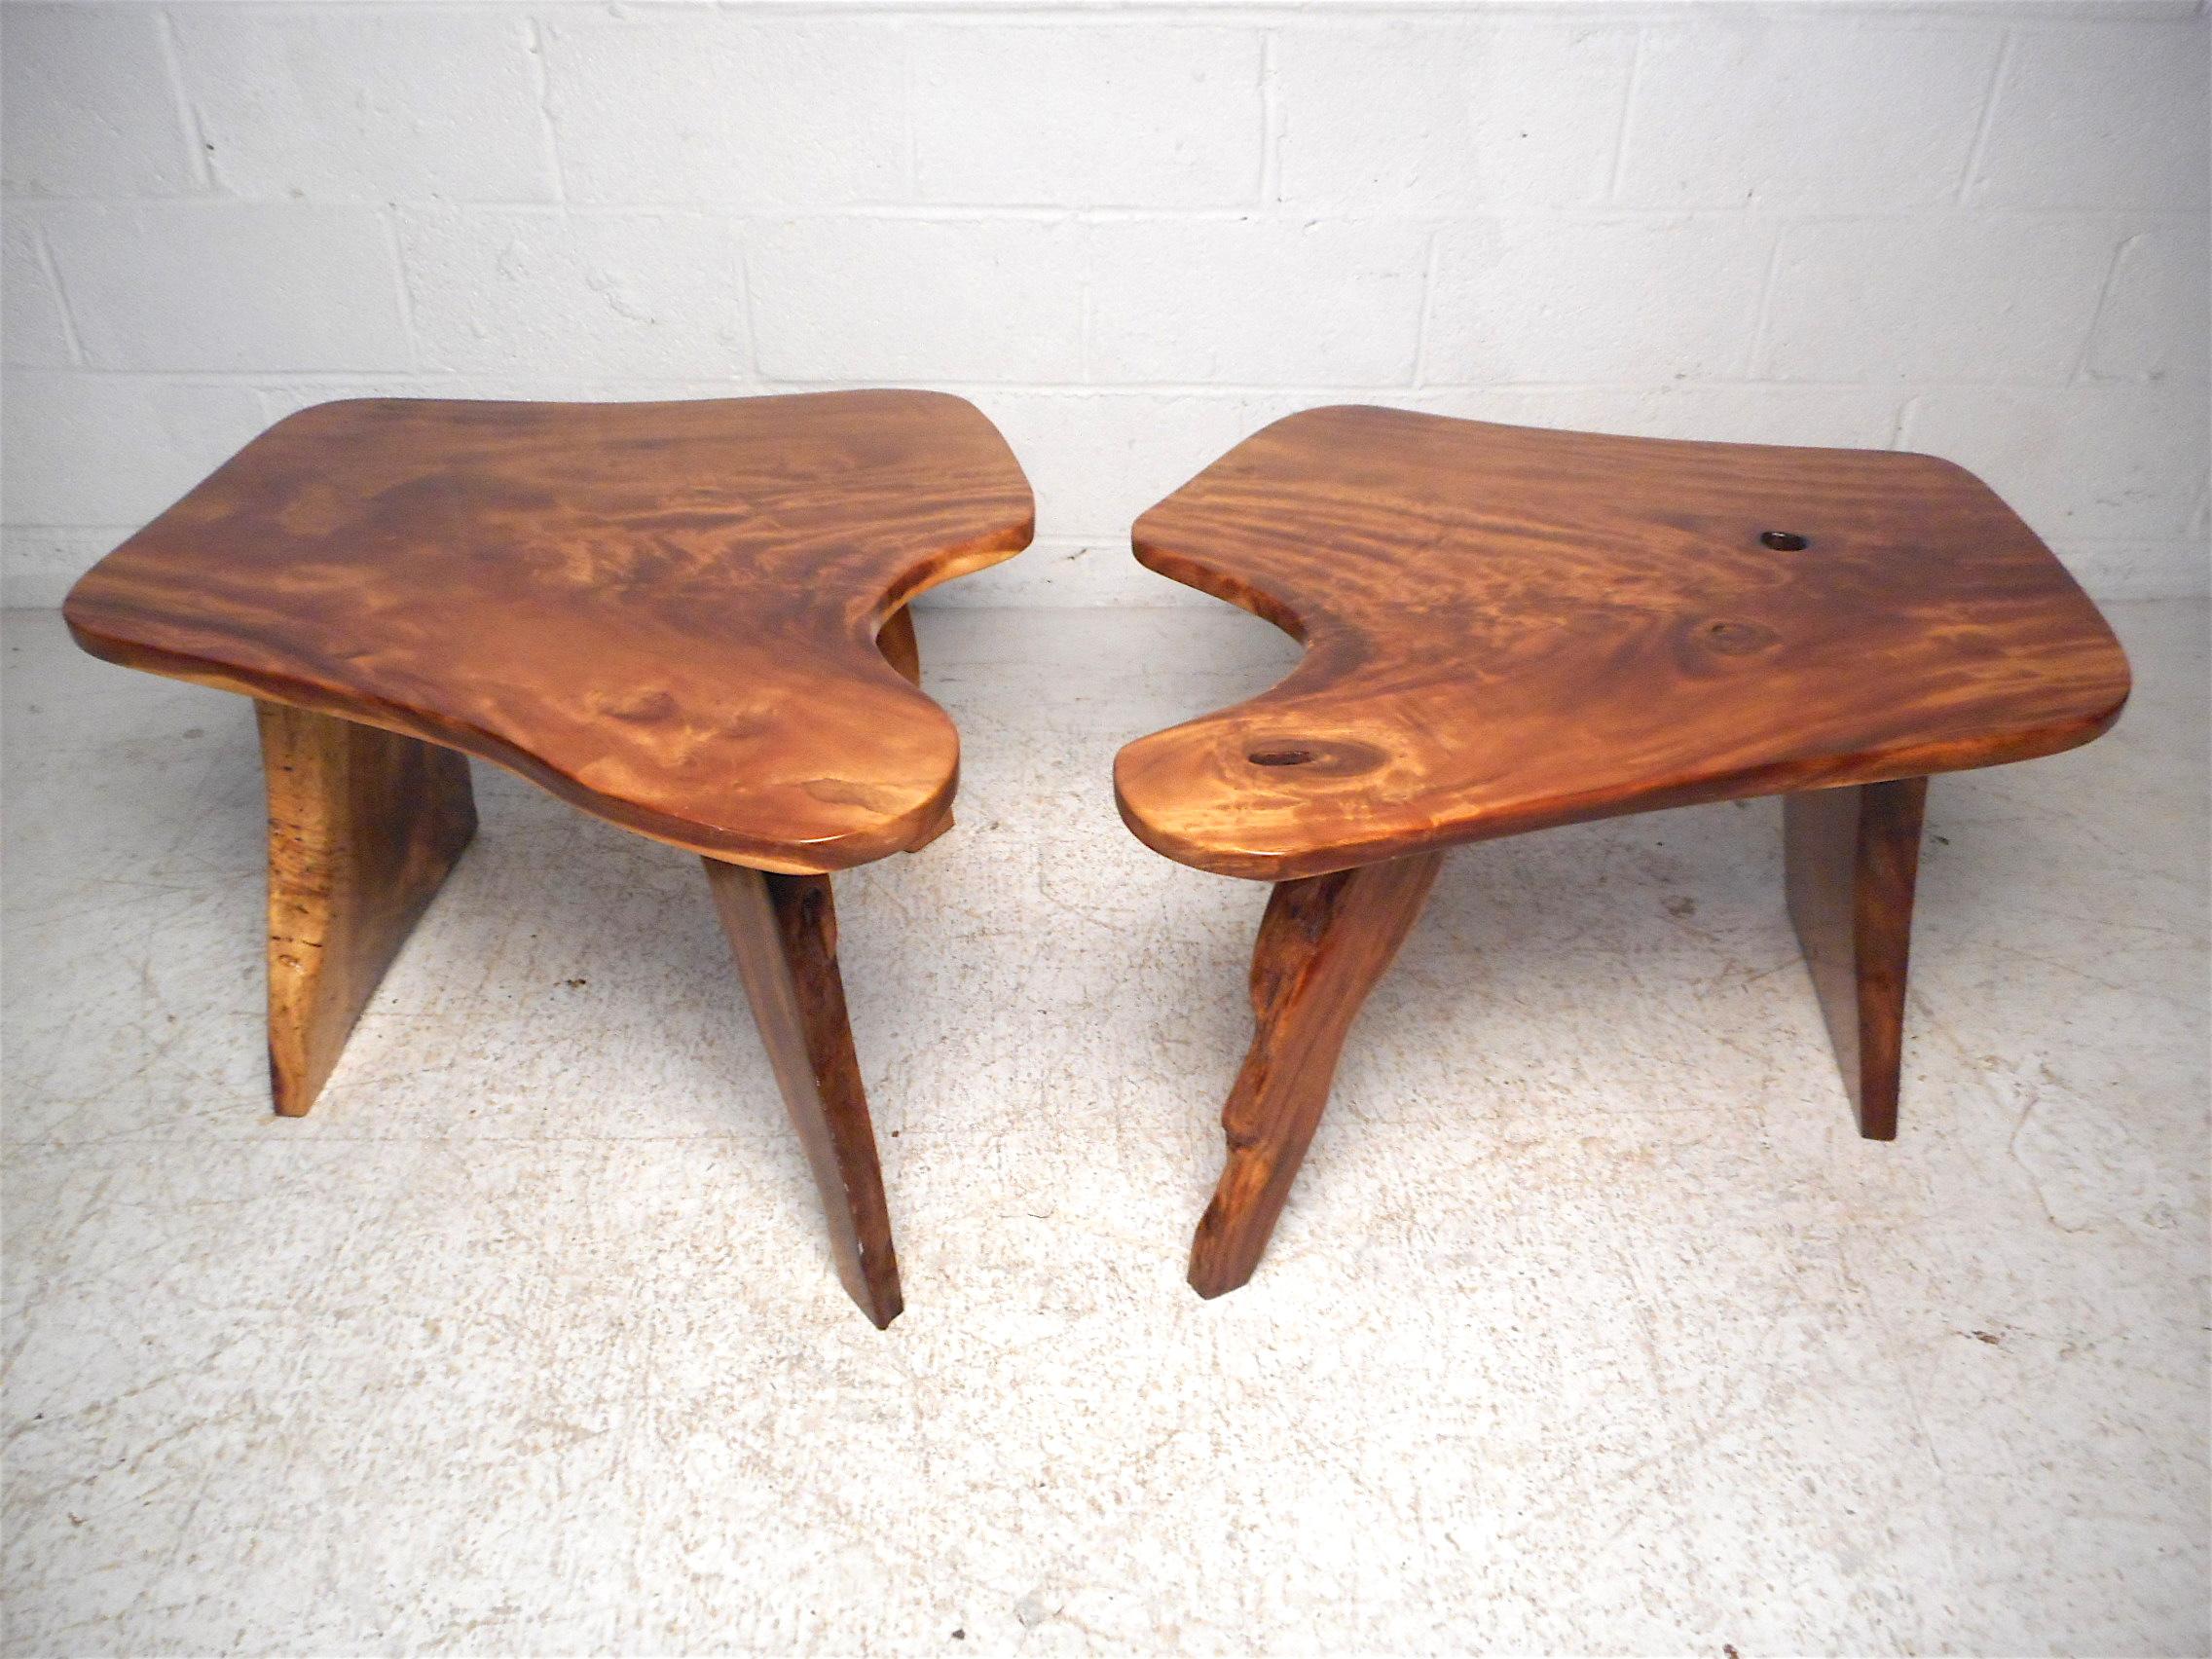 Impressive pair of live-edge tree slab tables. Perfect for use as end/side tables. Sleek and smooth lacquered finish. Beautiful wood grain pattern along the tabletop and the slab leg supports. This pair is sure to add a lively dimension to any